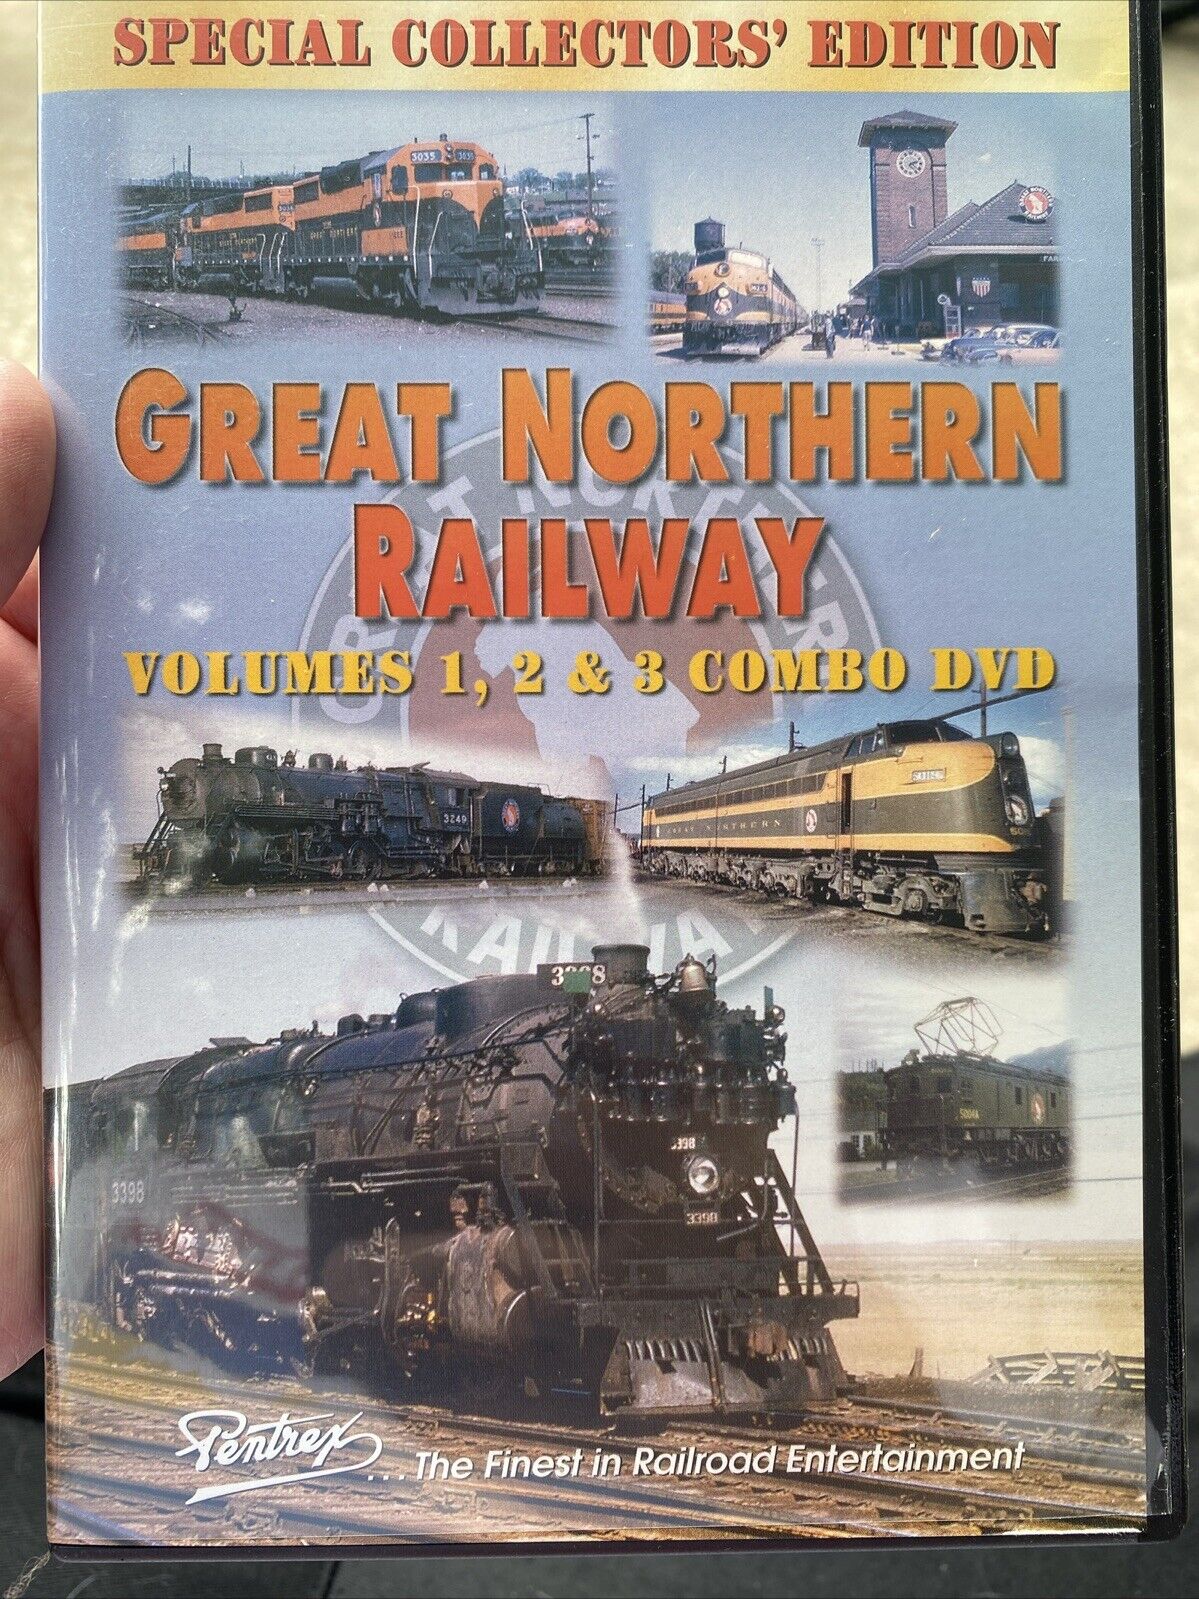 Great Northern Railway Combo DVD by Pentrex